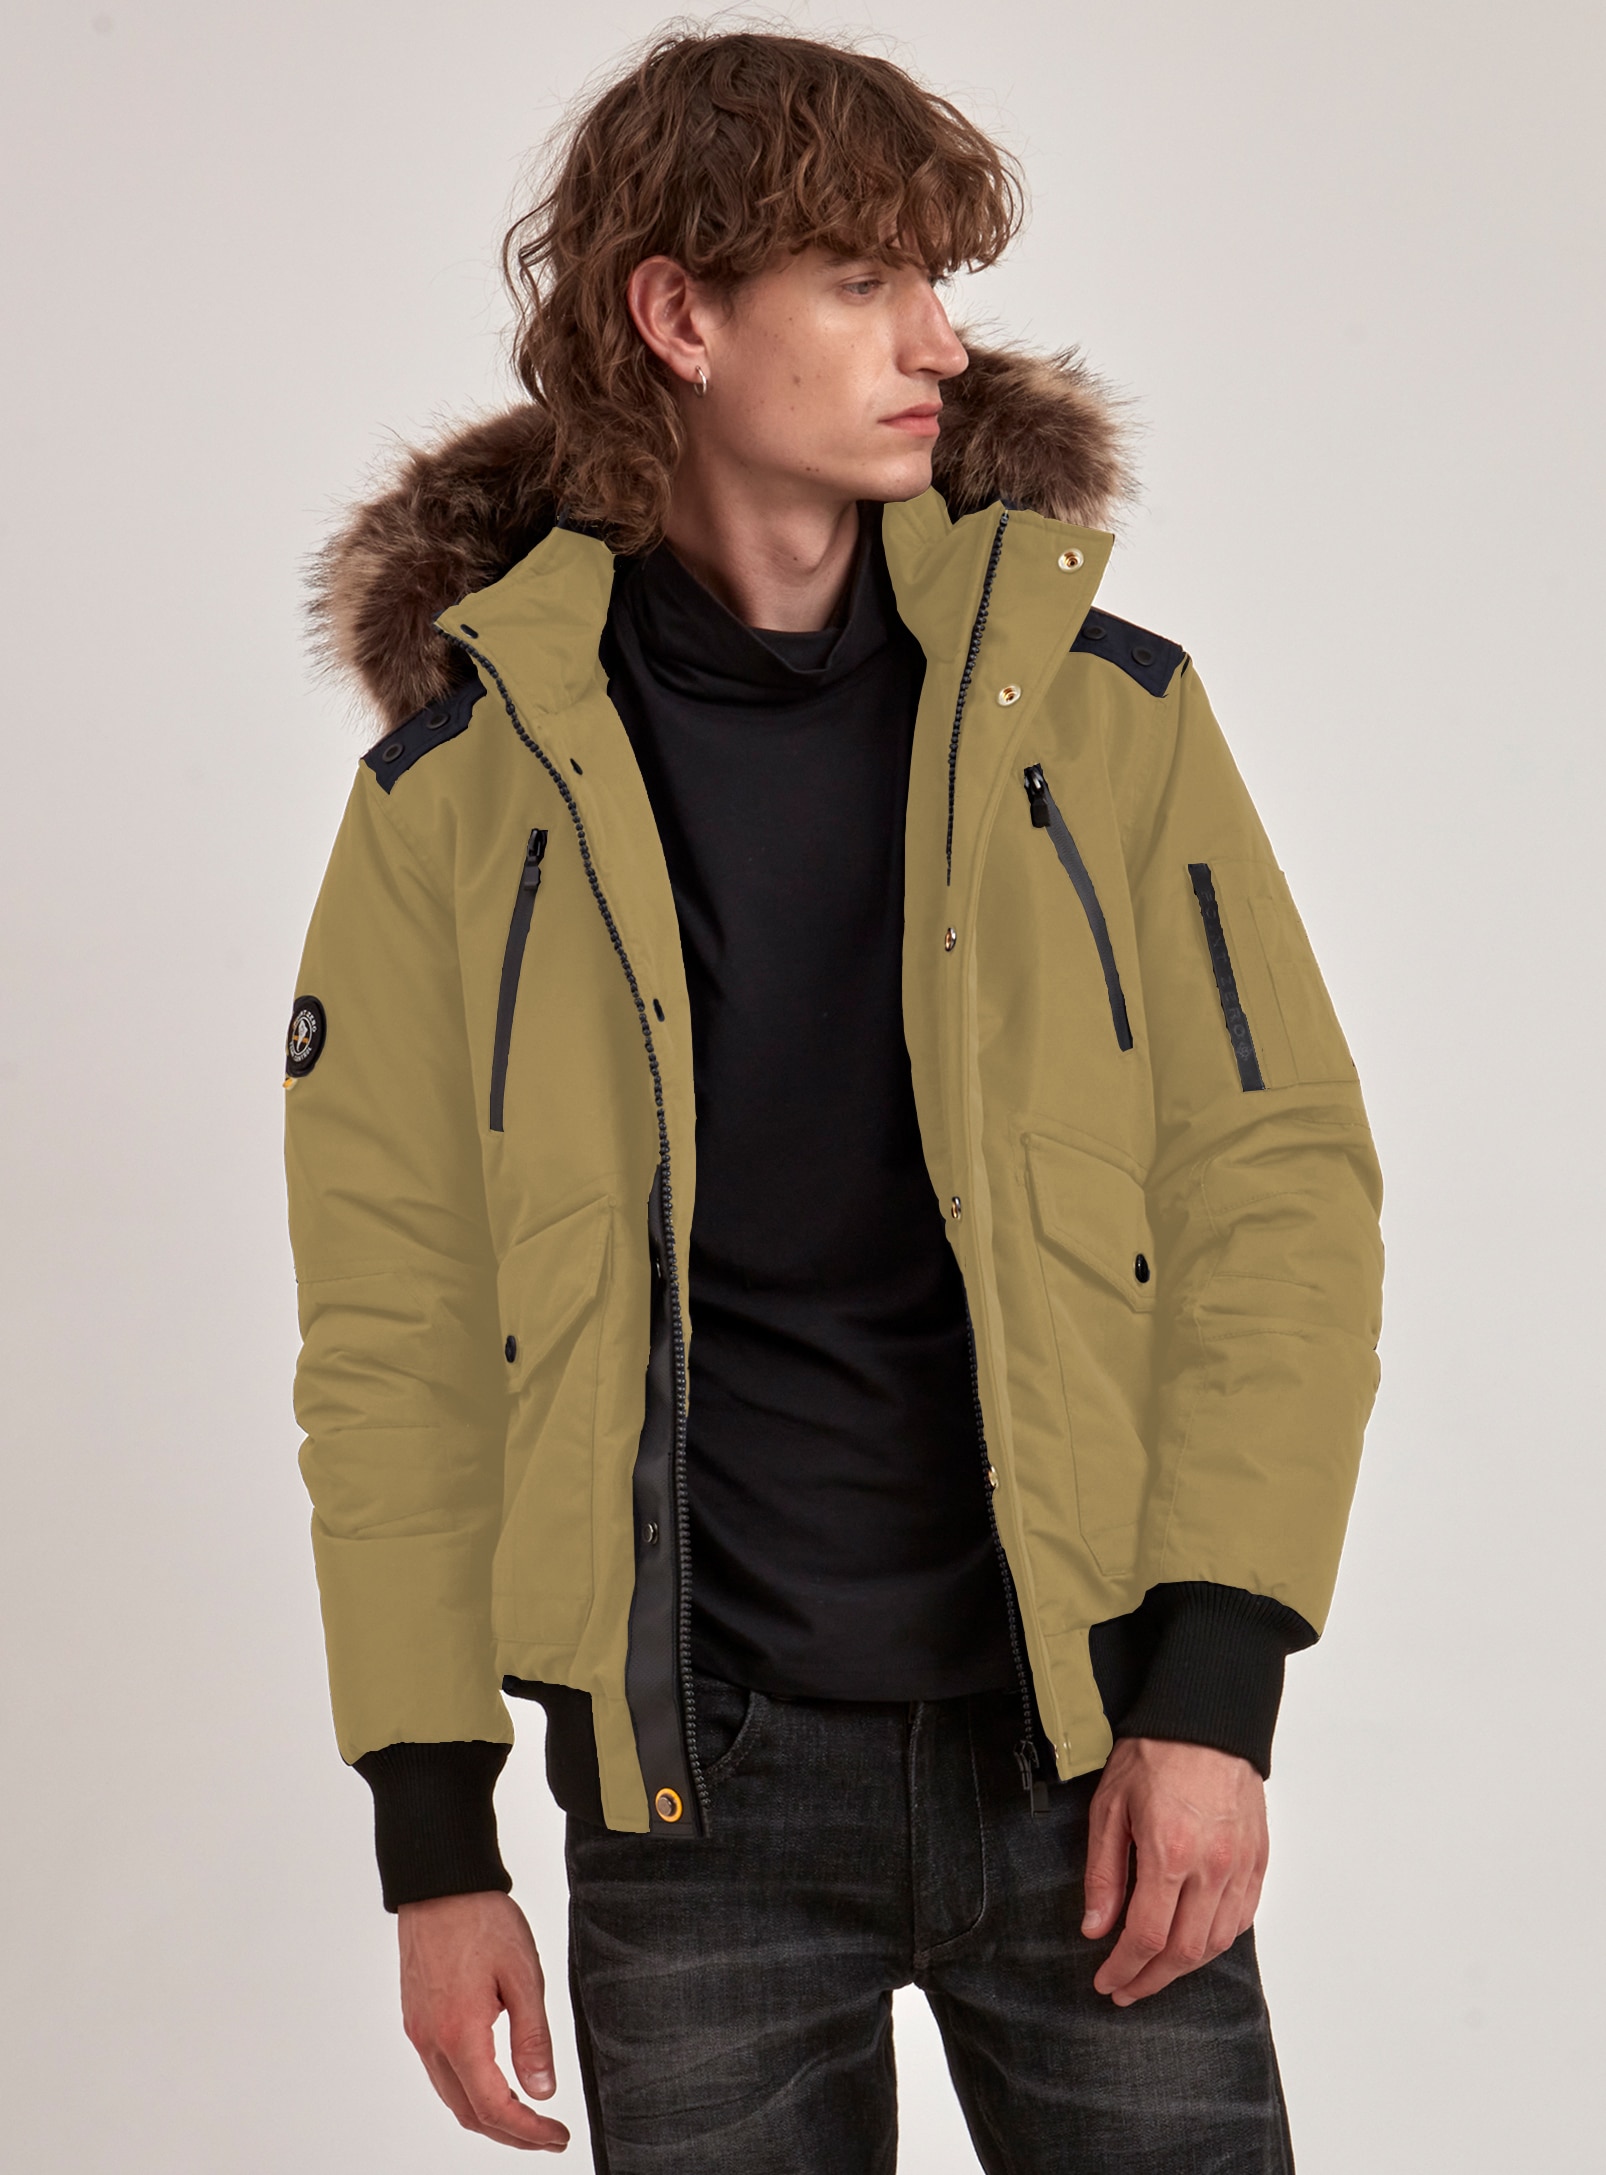 Clothing & Shoes - Jackets & Coats - Coats & Parkas - Menswear - Point Zero  Ultralight Quilted Jacket - Online Shopping for Canadians